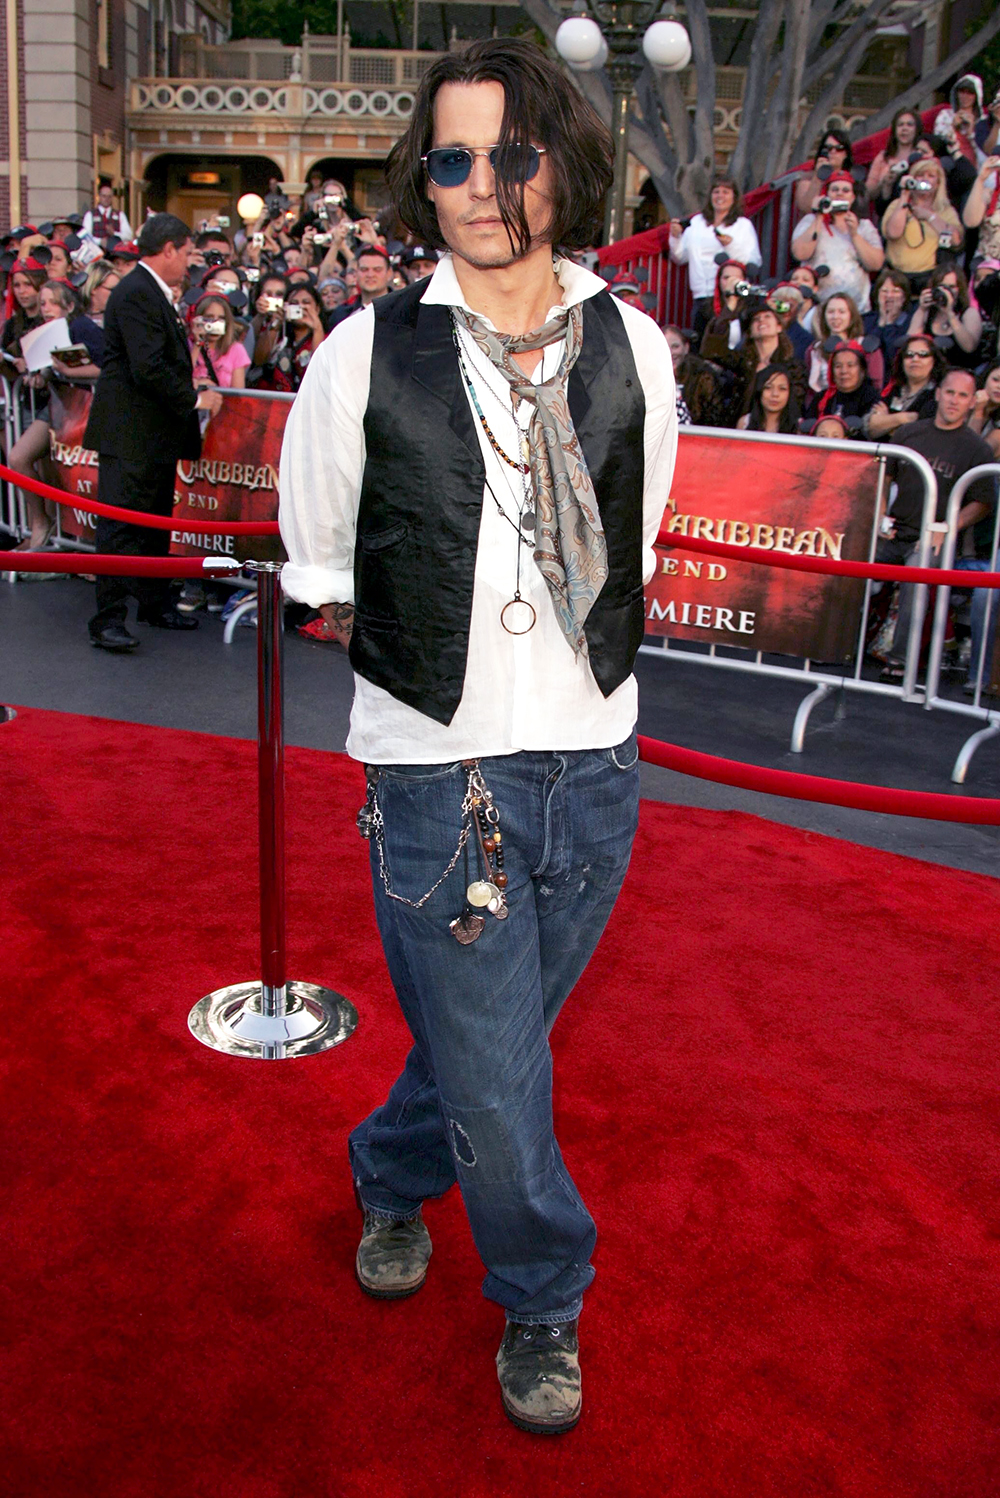 <p>Johnny Depp would return to his role of Jack Sparrow four more times. Here, looks rocker chic at the premiere of ‘Pirates of the Caribbean: At World’s End’ at Disneyland on May 19, 2017. Looking very bohemian, he wore baggy jeans, a vest, a scarf, and plenty of beads.</p>